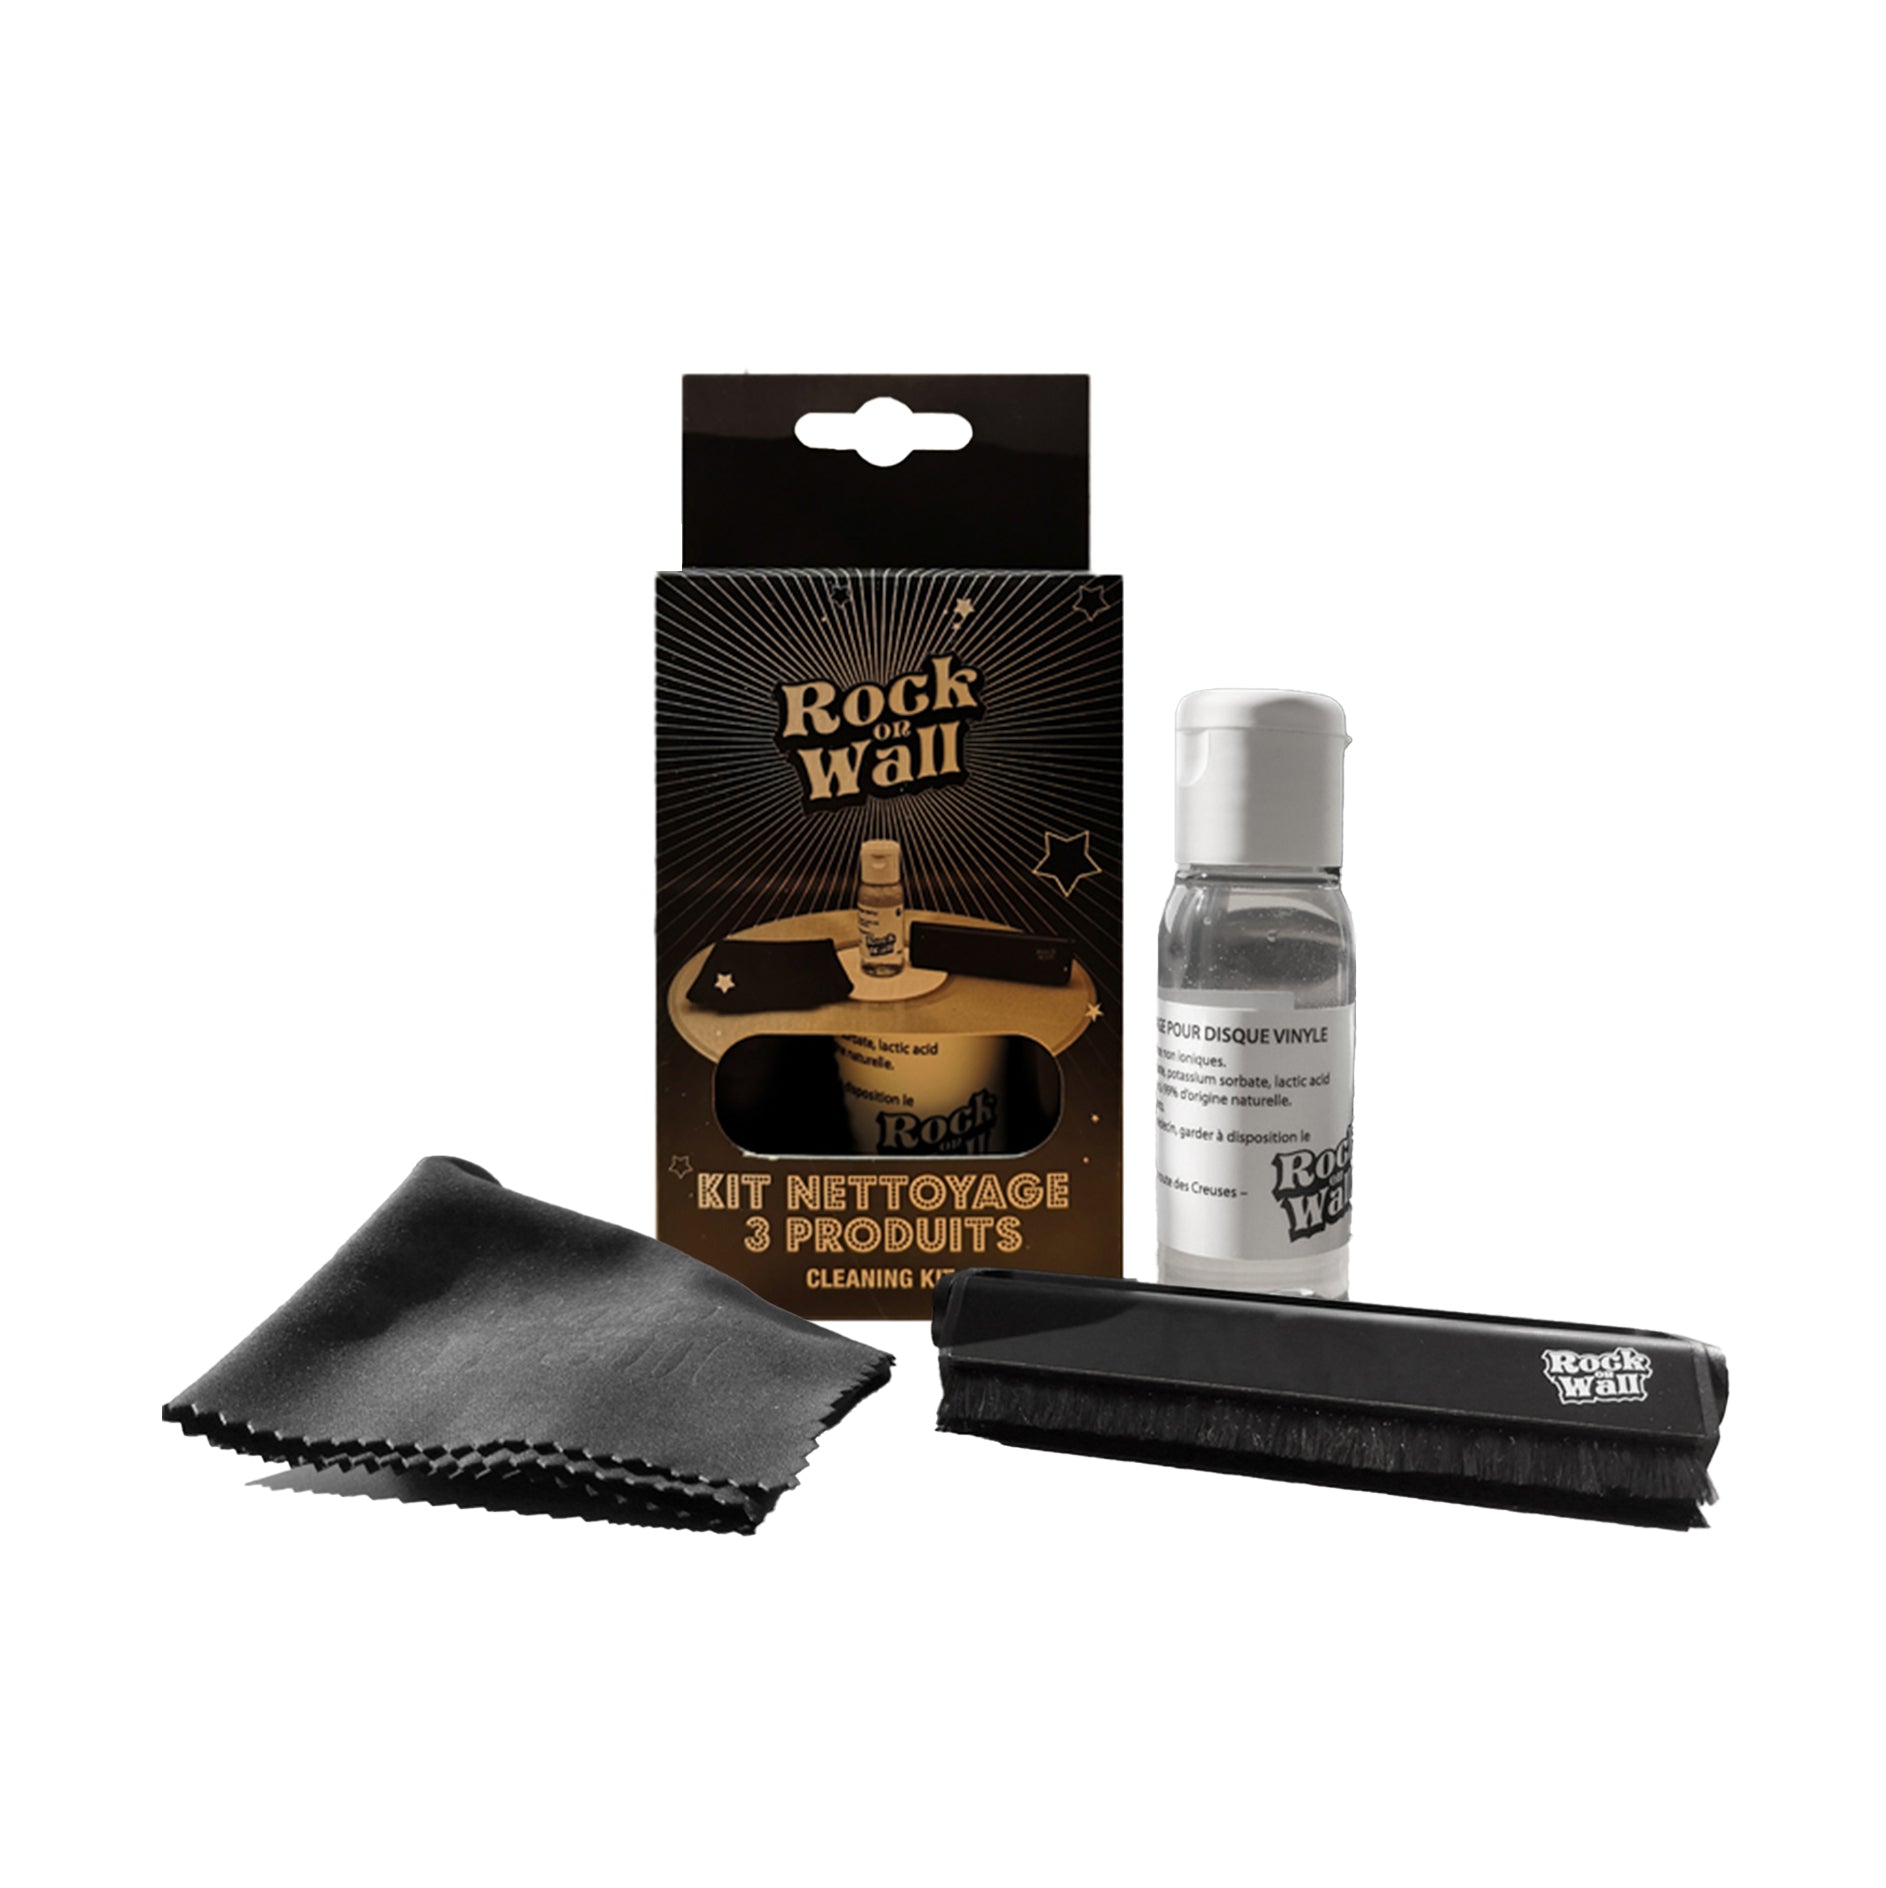 ◉ 3-Product cleaning Kit for Turntable